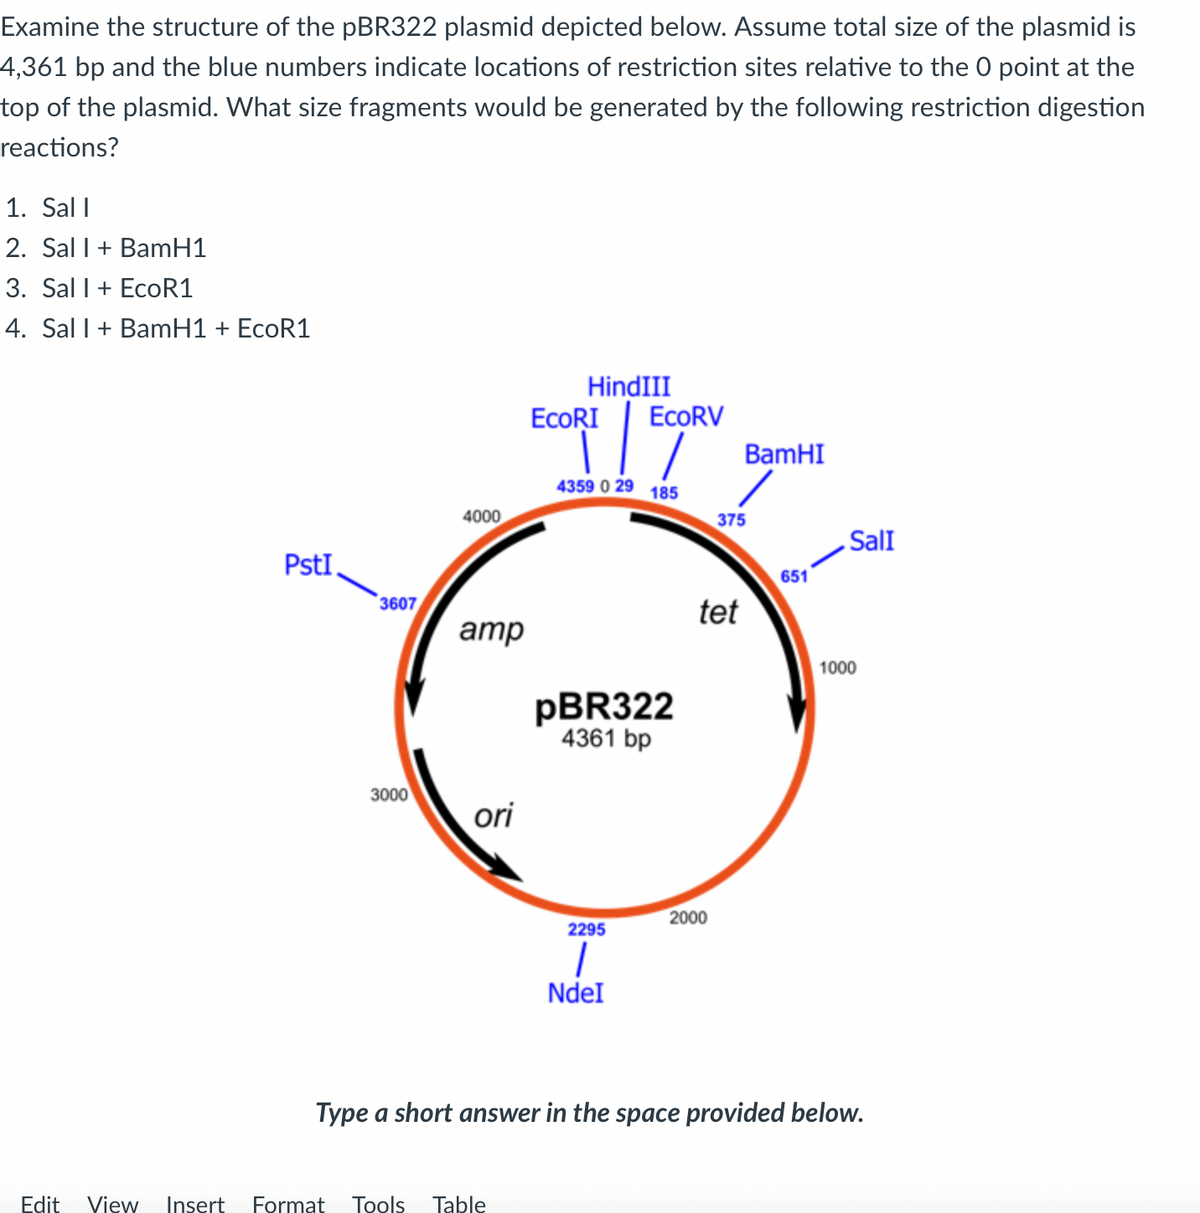 Examine the structure of the pBR322 plasmid depicted below. Assume total size of the plasmid is
4,361 bp and the blue numbers indicate locations of restriction sites relative to the O point at the
top of the plasmid. What size fragments would be generated by the following restriction digestion
reactions?
1. Sall
2. Sal 1 + BamH1
3. Sal 1 + EcoR1
4. Sal I + BamH1 + EcoR1
PstI
3607
3000
4000
amp
ori
HindIII
Edit View Insert Format Tools Table
EcoRI EcoRV
4359 0 29 185
pBR322
4361 bp
2295
NdeI
tet
2000
BamHI
375
651
SalI
1000
Type a short answer in the space provided below.